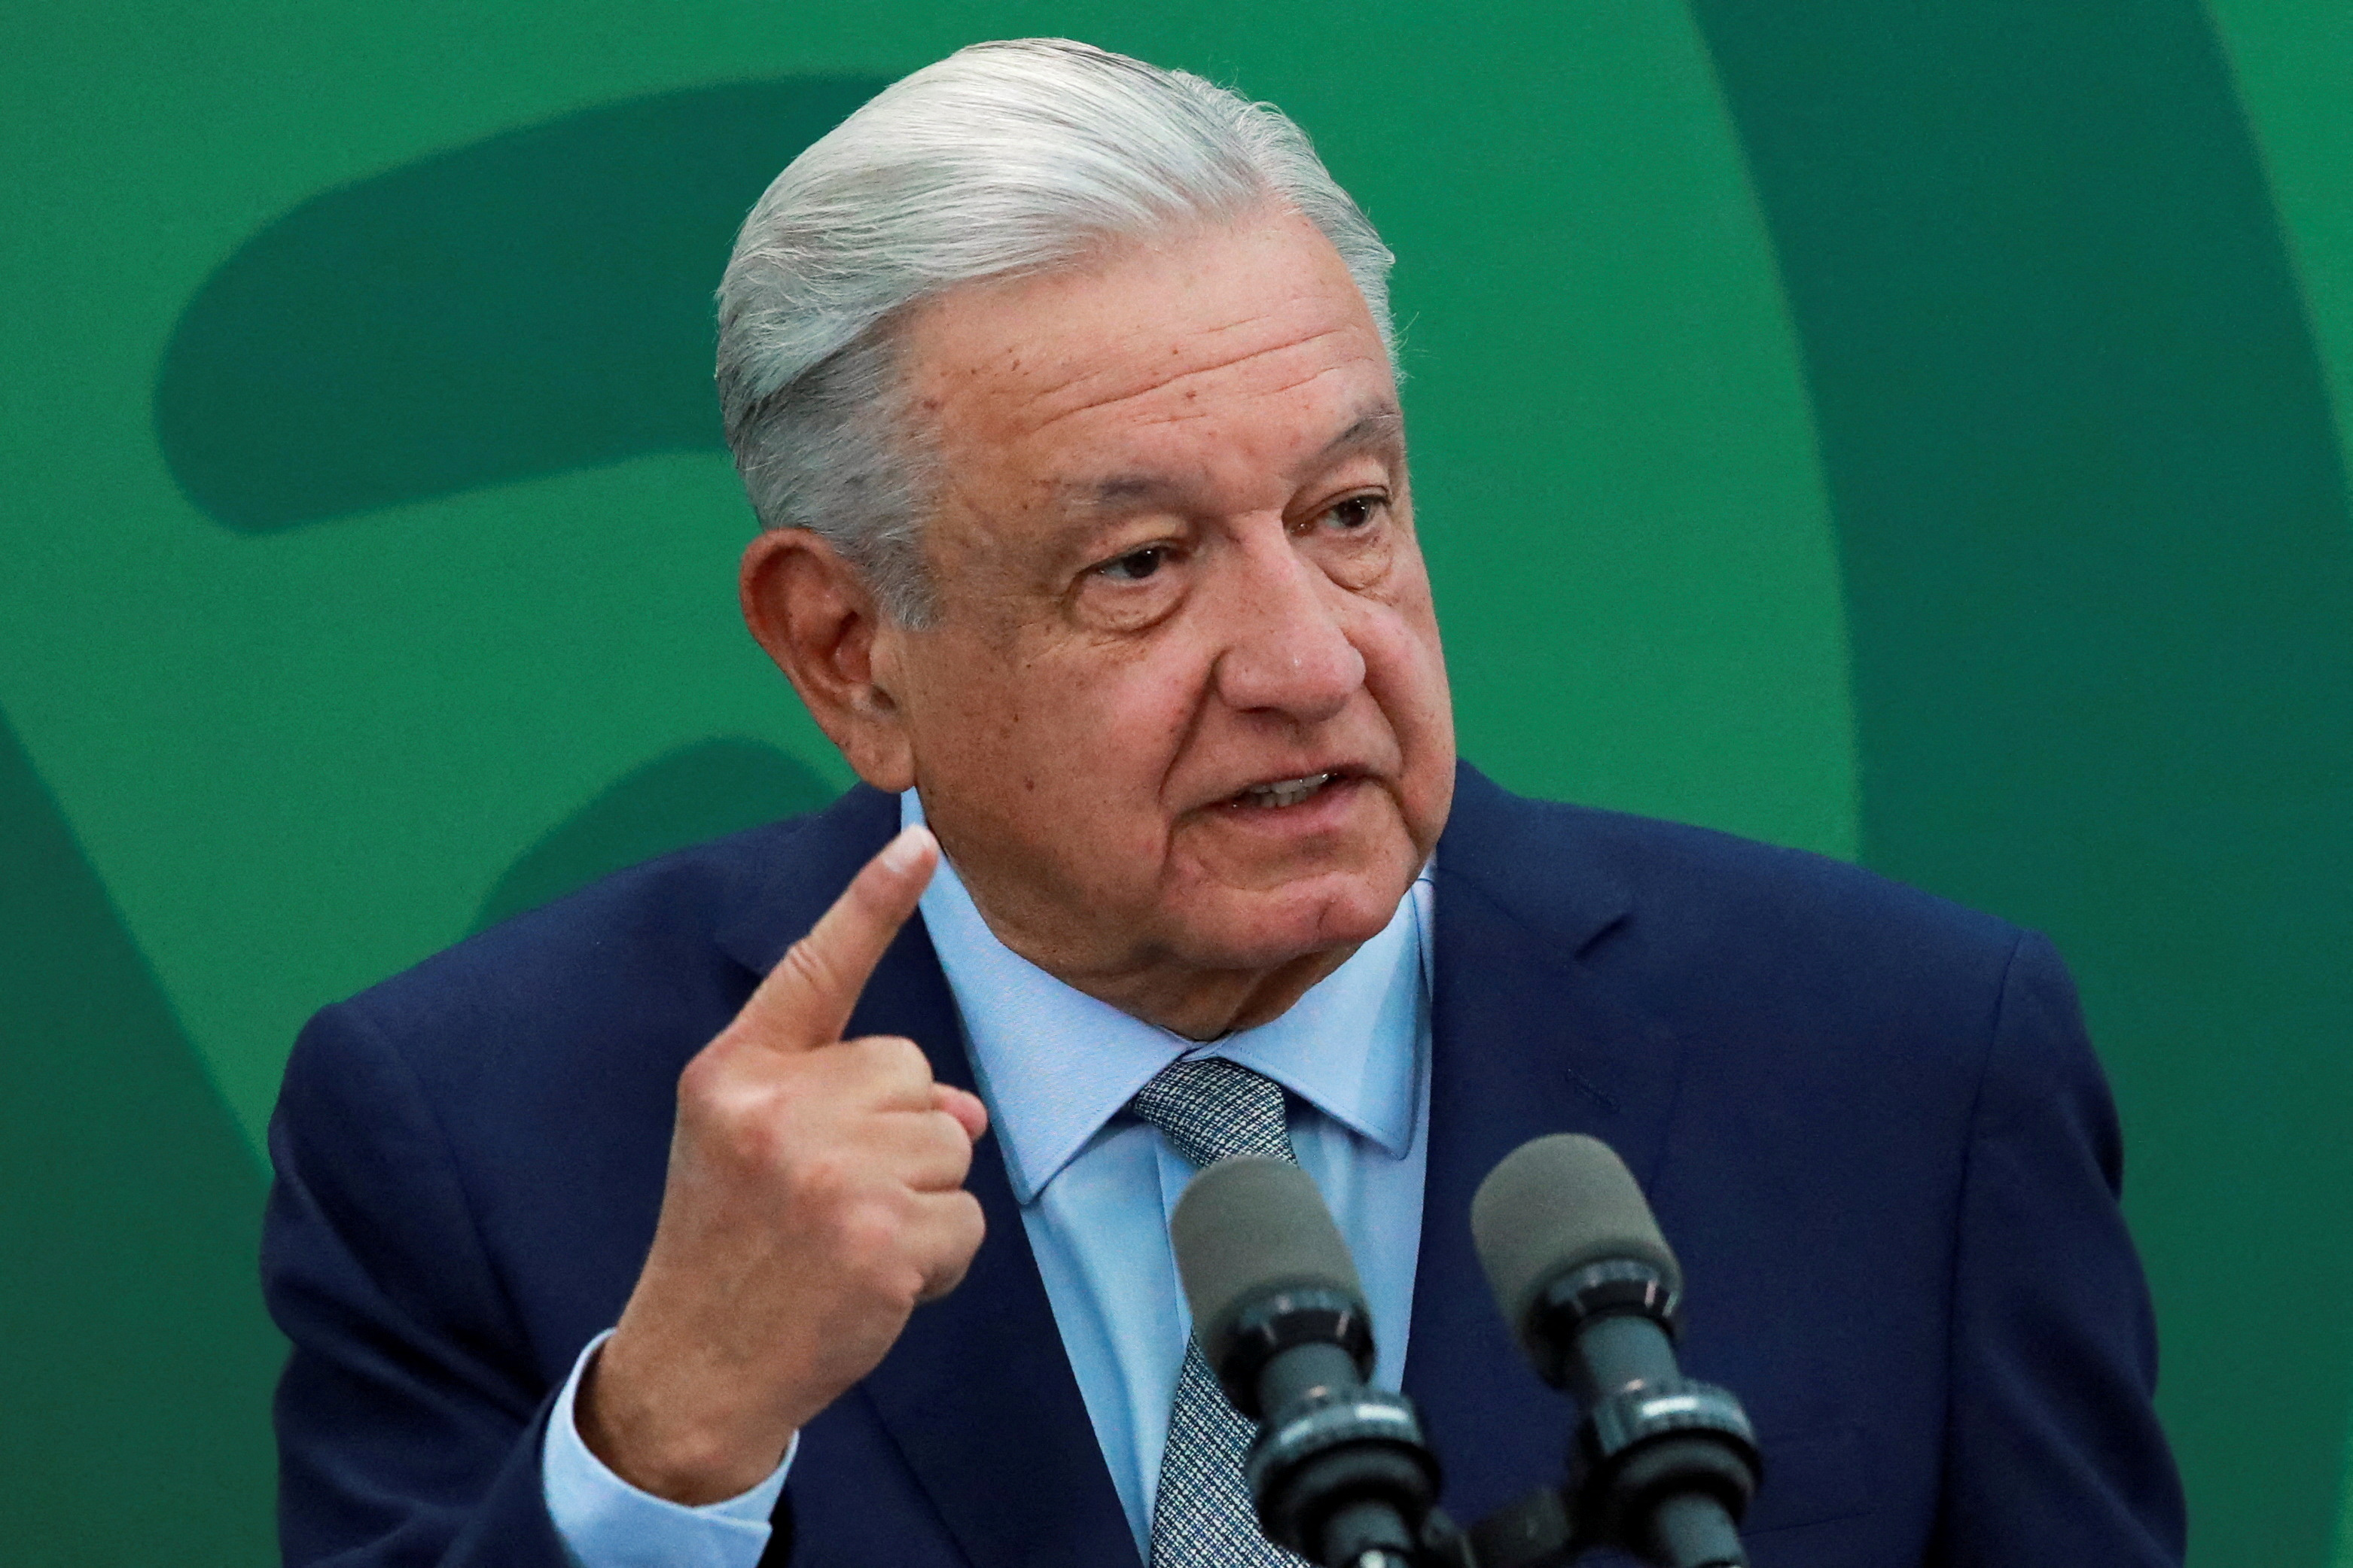 Mexico's President Andrés Manuel López Obrador speaks during a news conference at the Secretariat of Security and Civil Protection in Mexico City, Mexico, March 9, 2023. Photo: REUTERS/Henry Romero